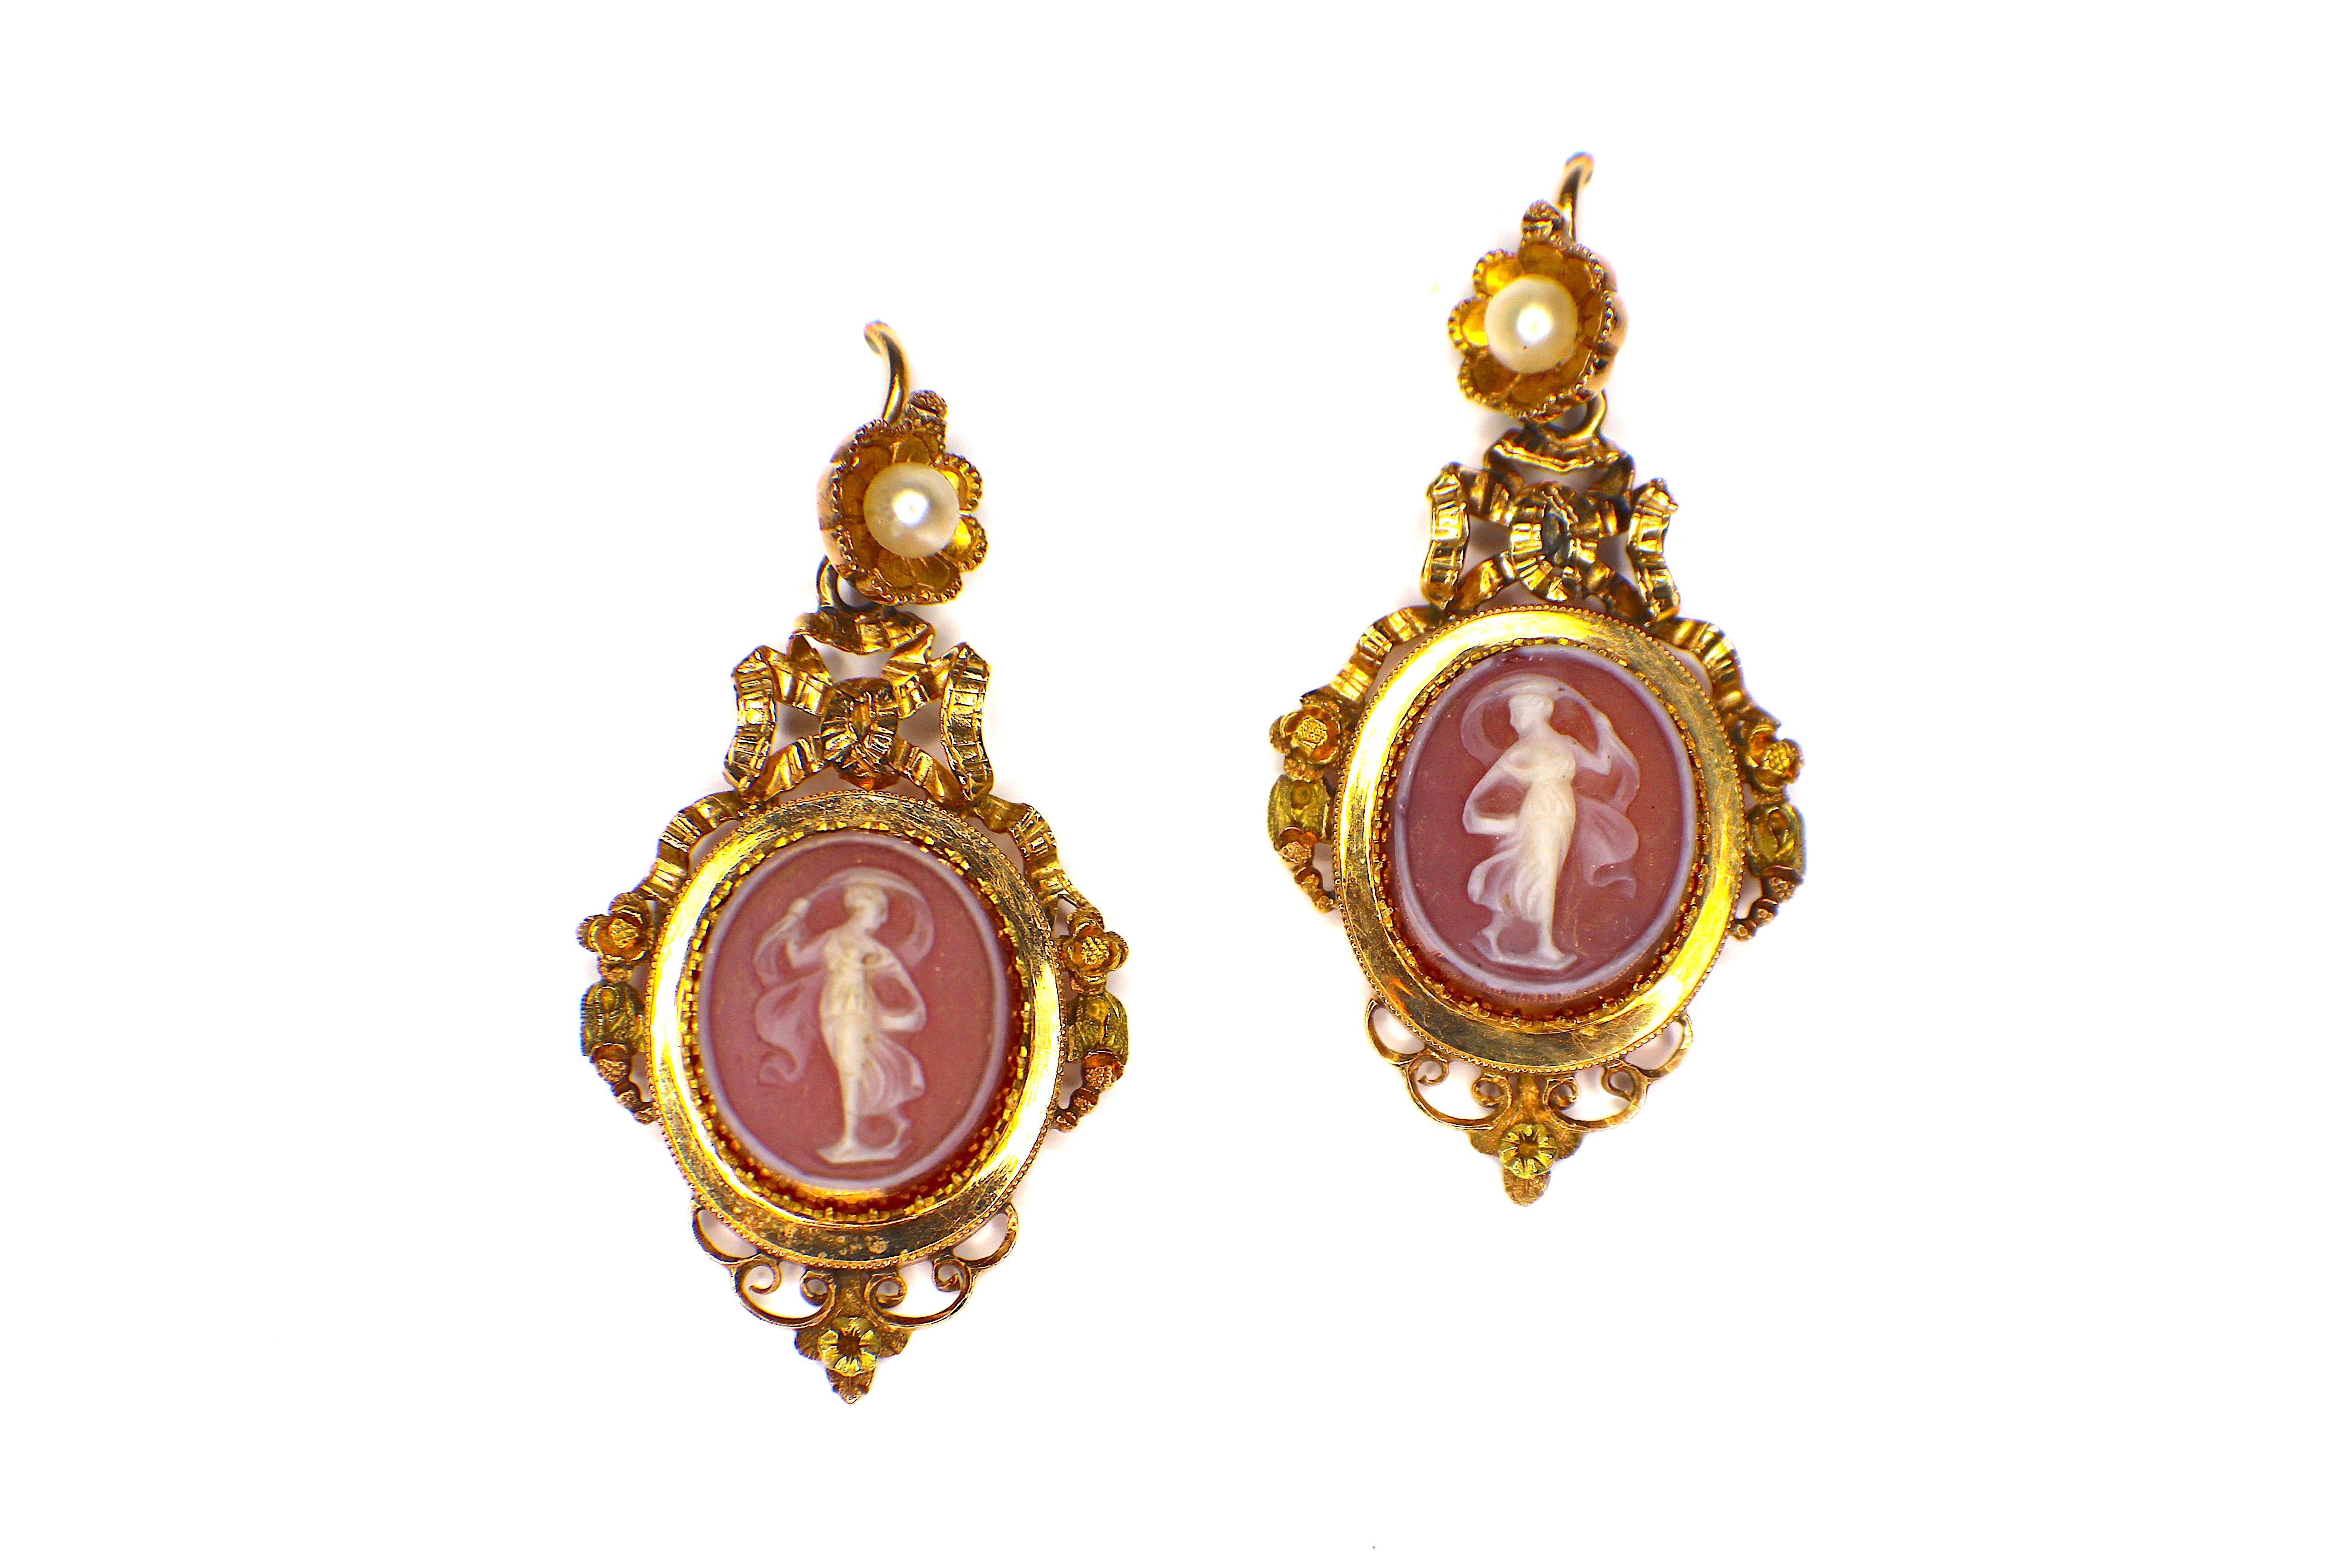 GEMOLITHOS Antique Cameo Agate and Pearl Earrings, 1860s In Good Condition For Sale In Munich, DE